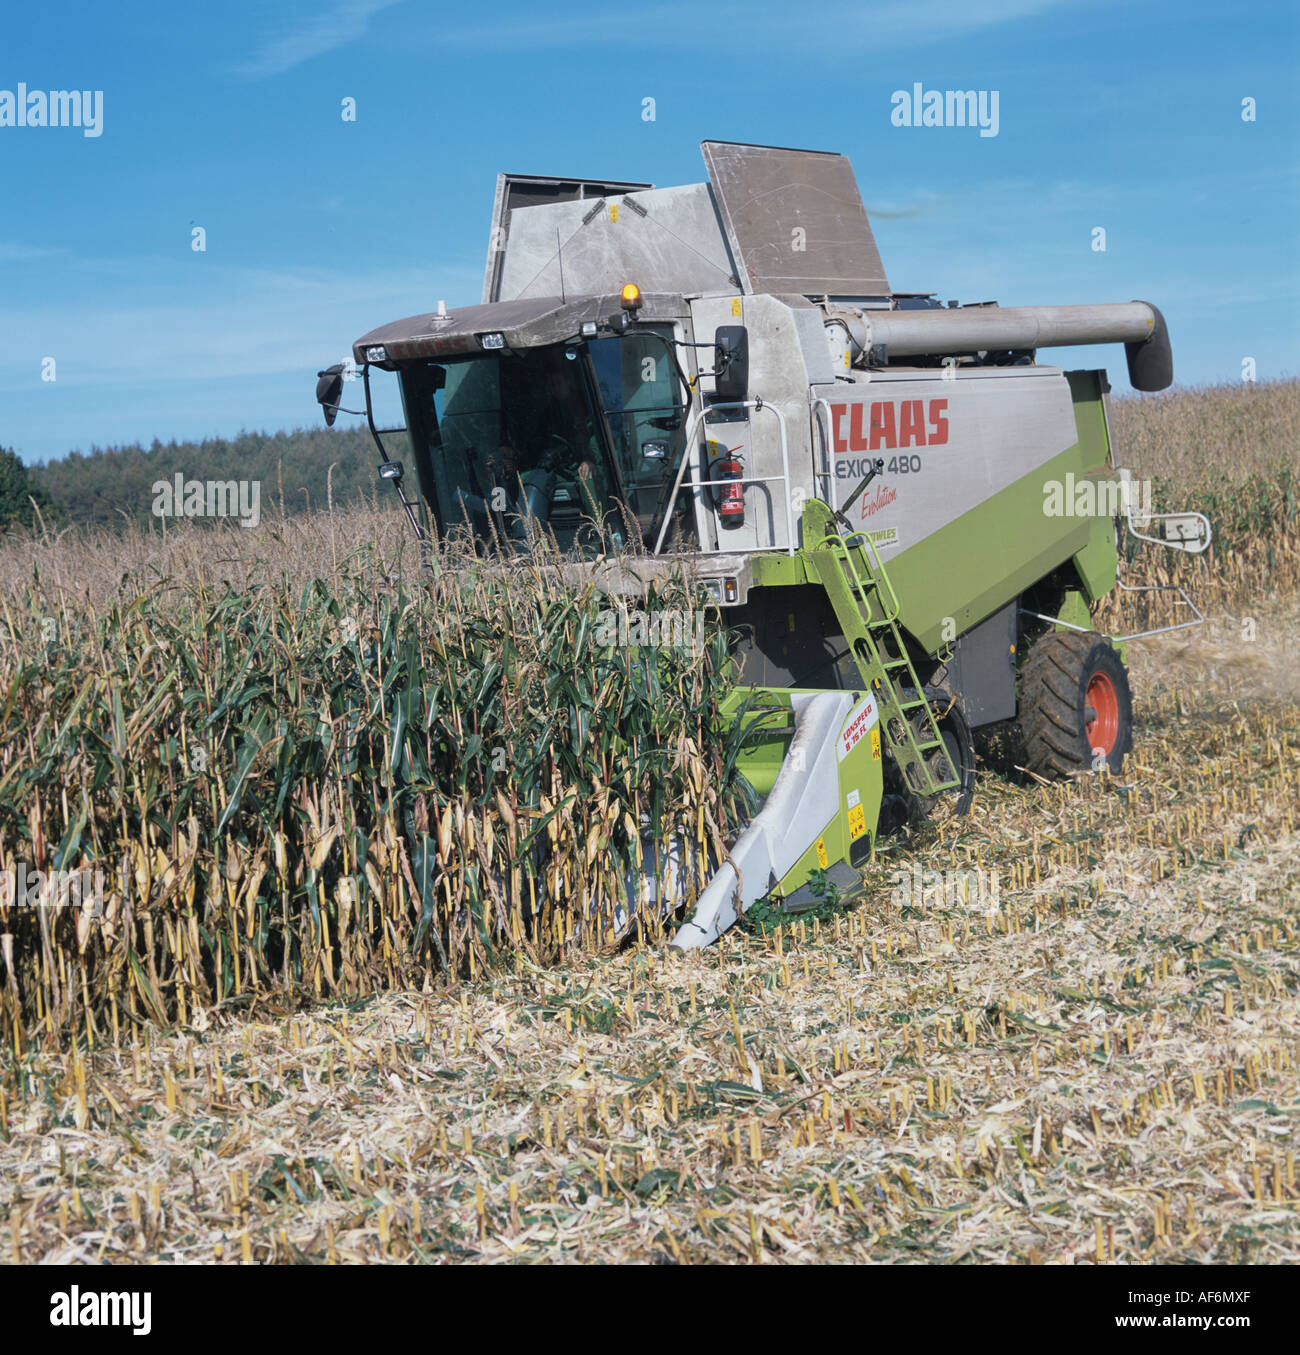 Claas Lexion with Conspeed header stripping combining mature maize crop Stock Photo